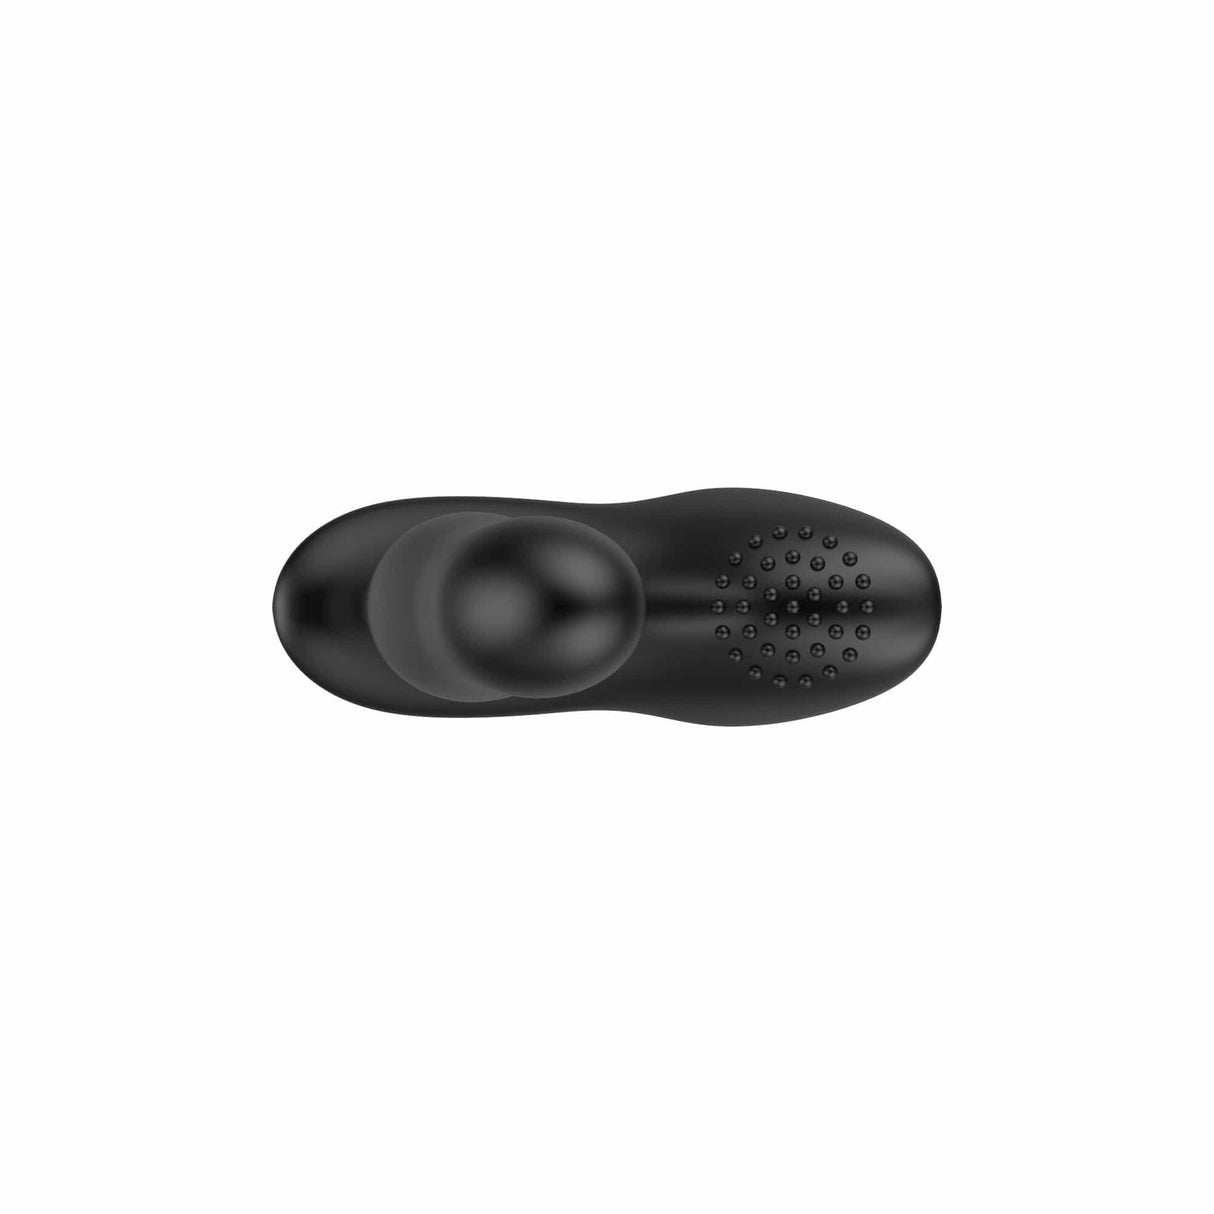 Nexus - Boost Rechargeable Inflatable Prostate Massager with Remote Control (Black) NE1067 CherryAffairs